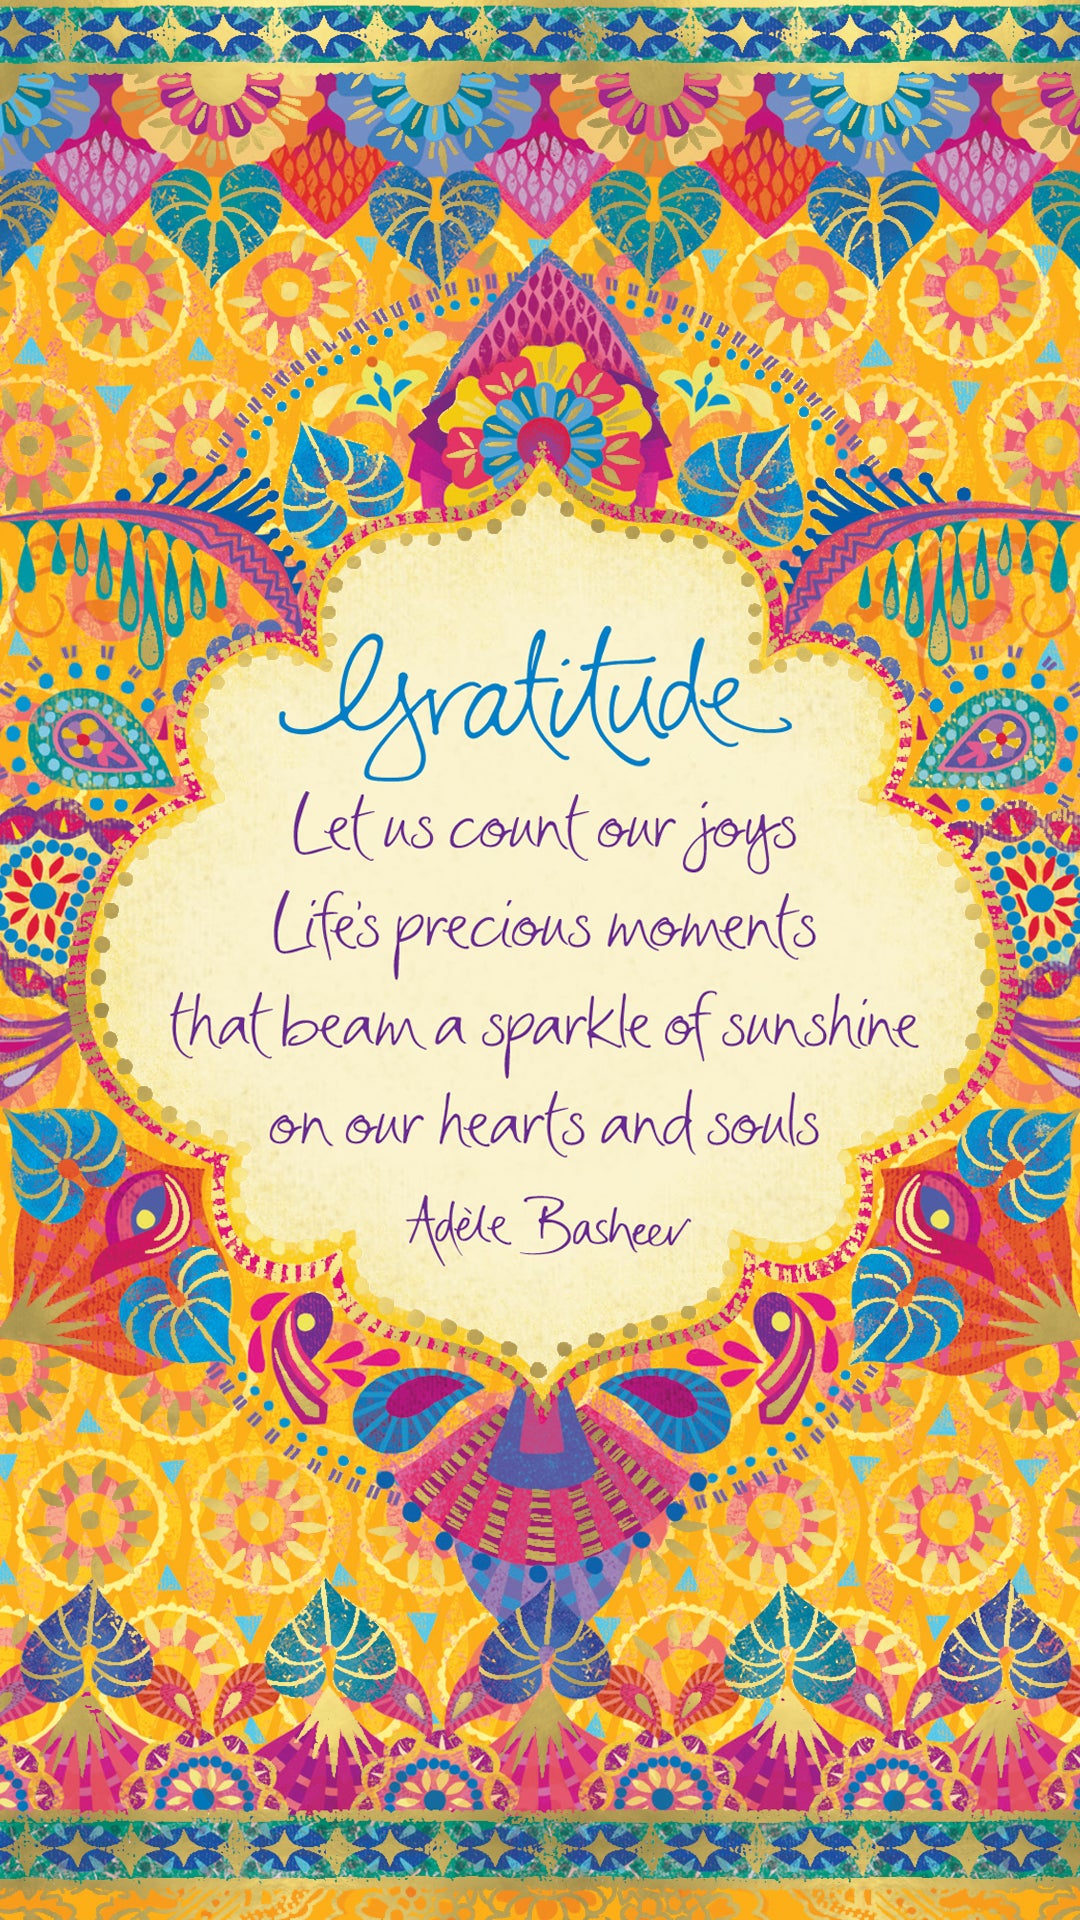 Gratitude Quote By Adèle Basheer - Free digital wallpaper